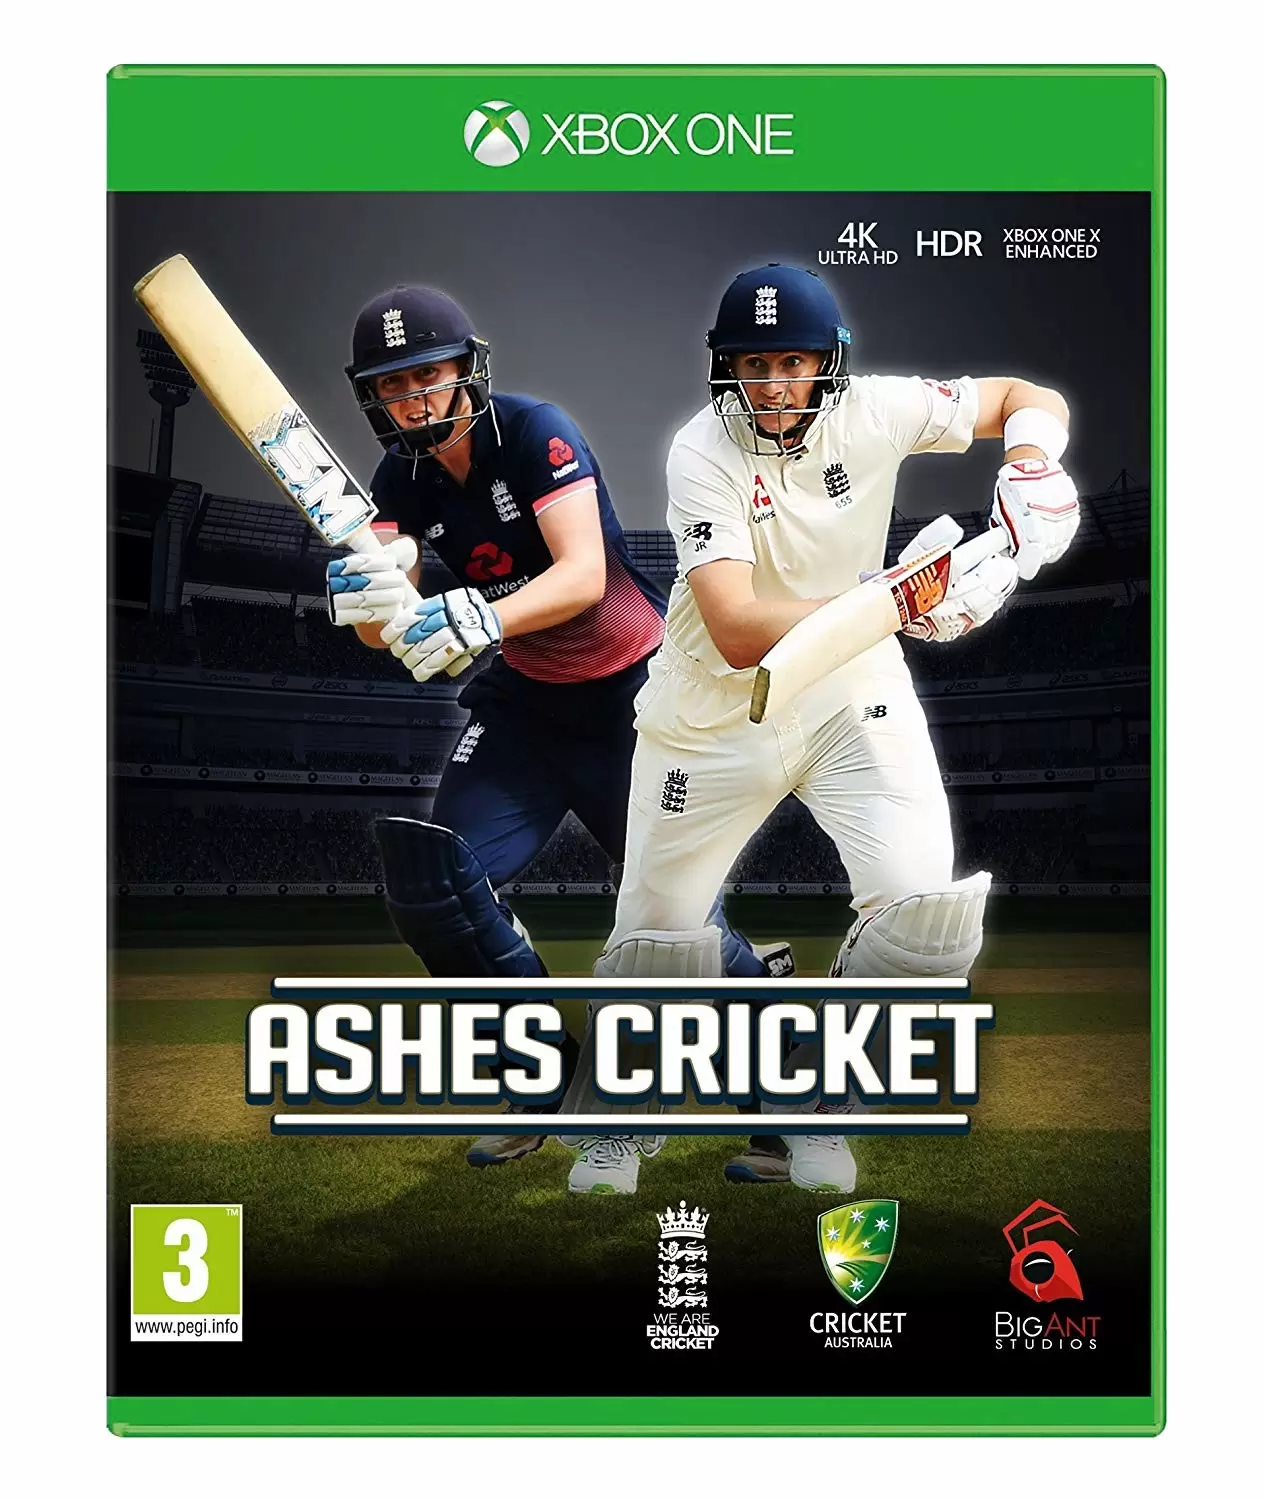 XBOX One Games - Ashes Cricket